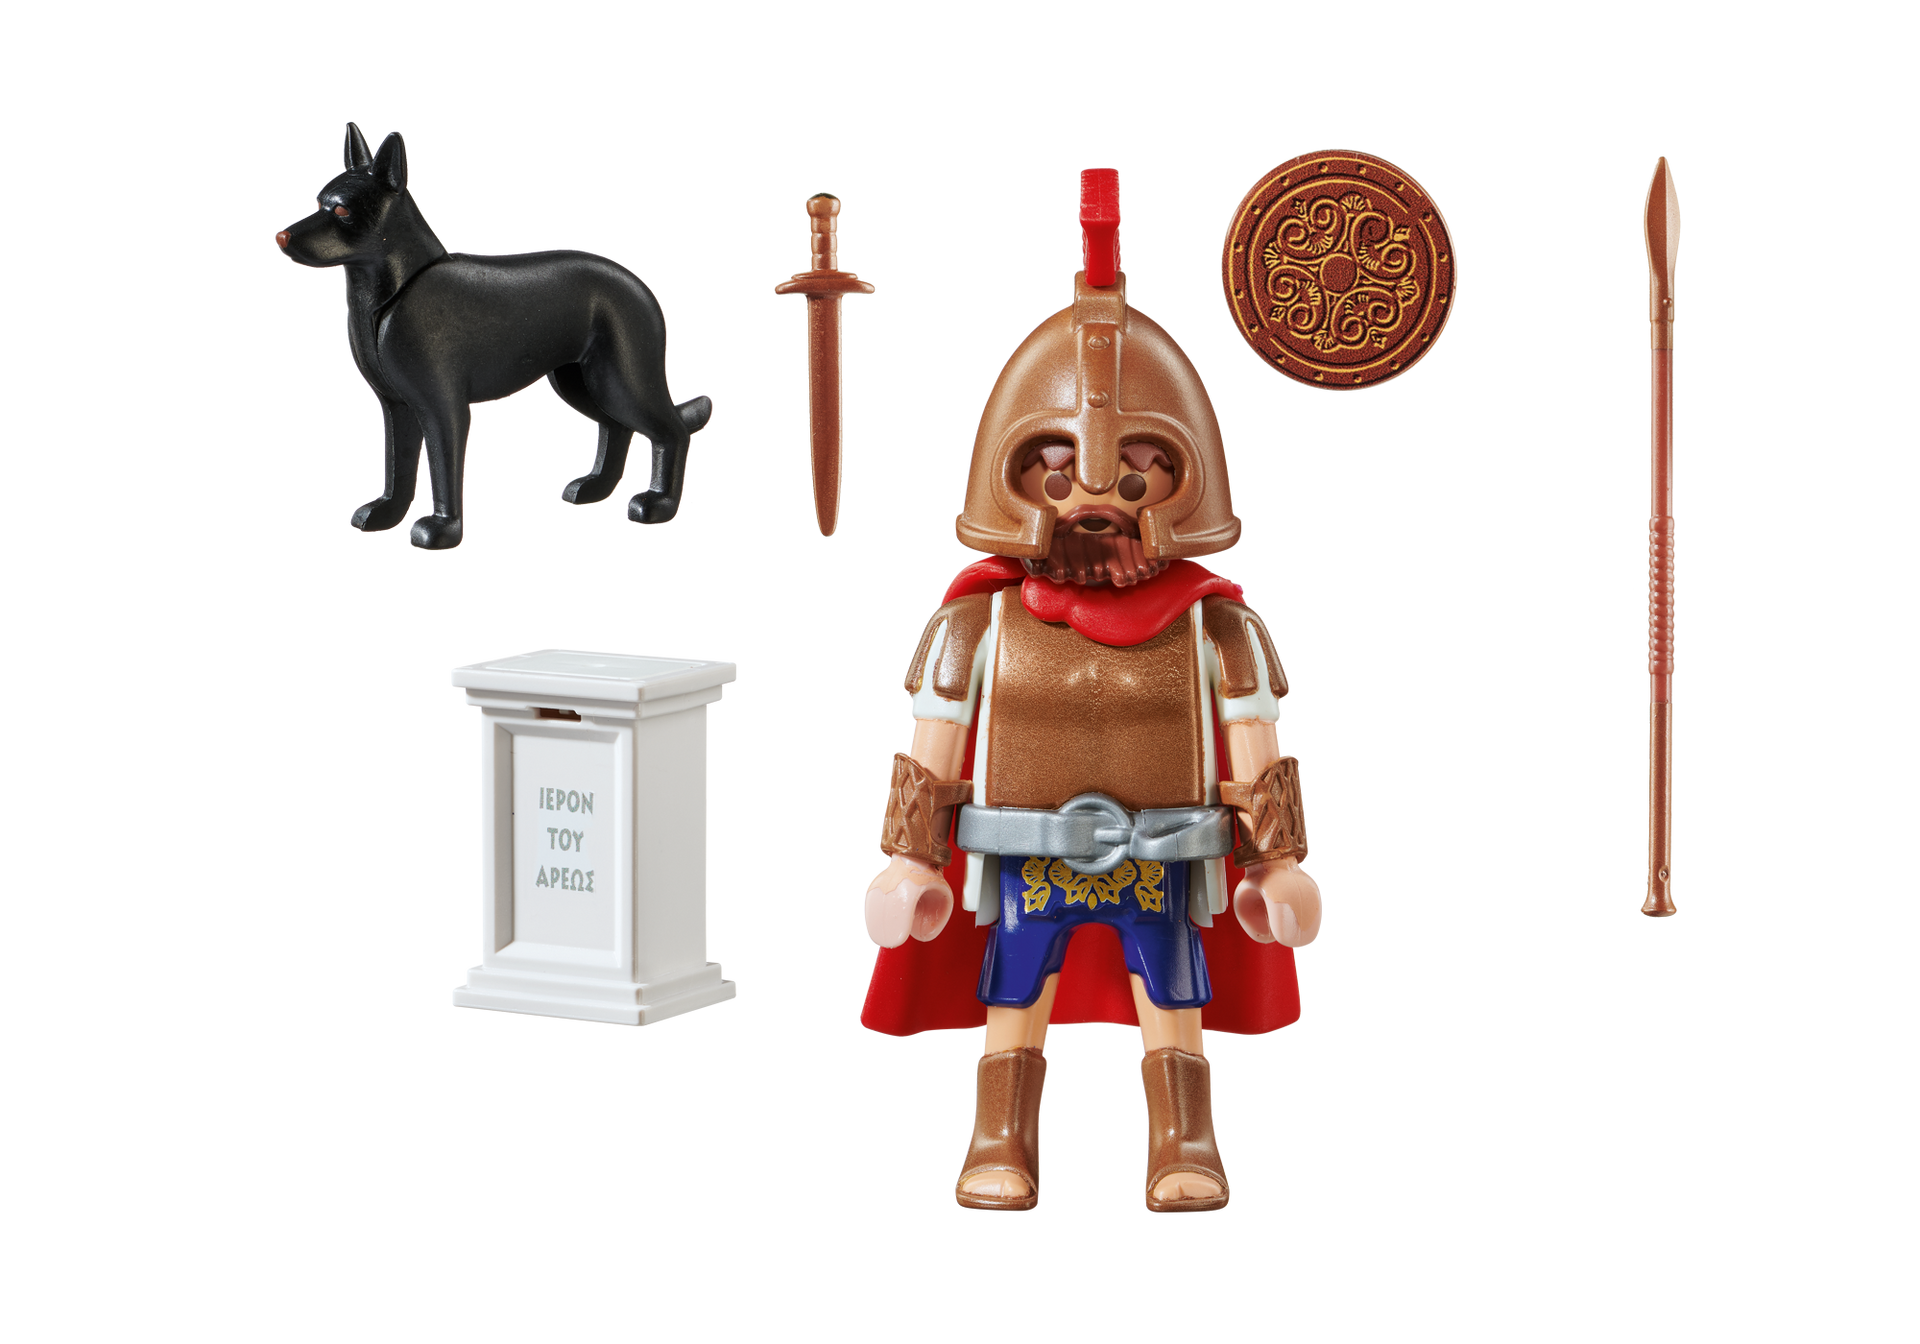 Playmobil Lotx3 30 62 7786 Shield round smooth surface 70216 Ares Greek Gods 